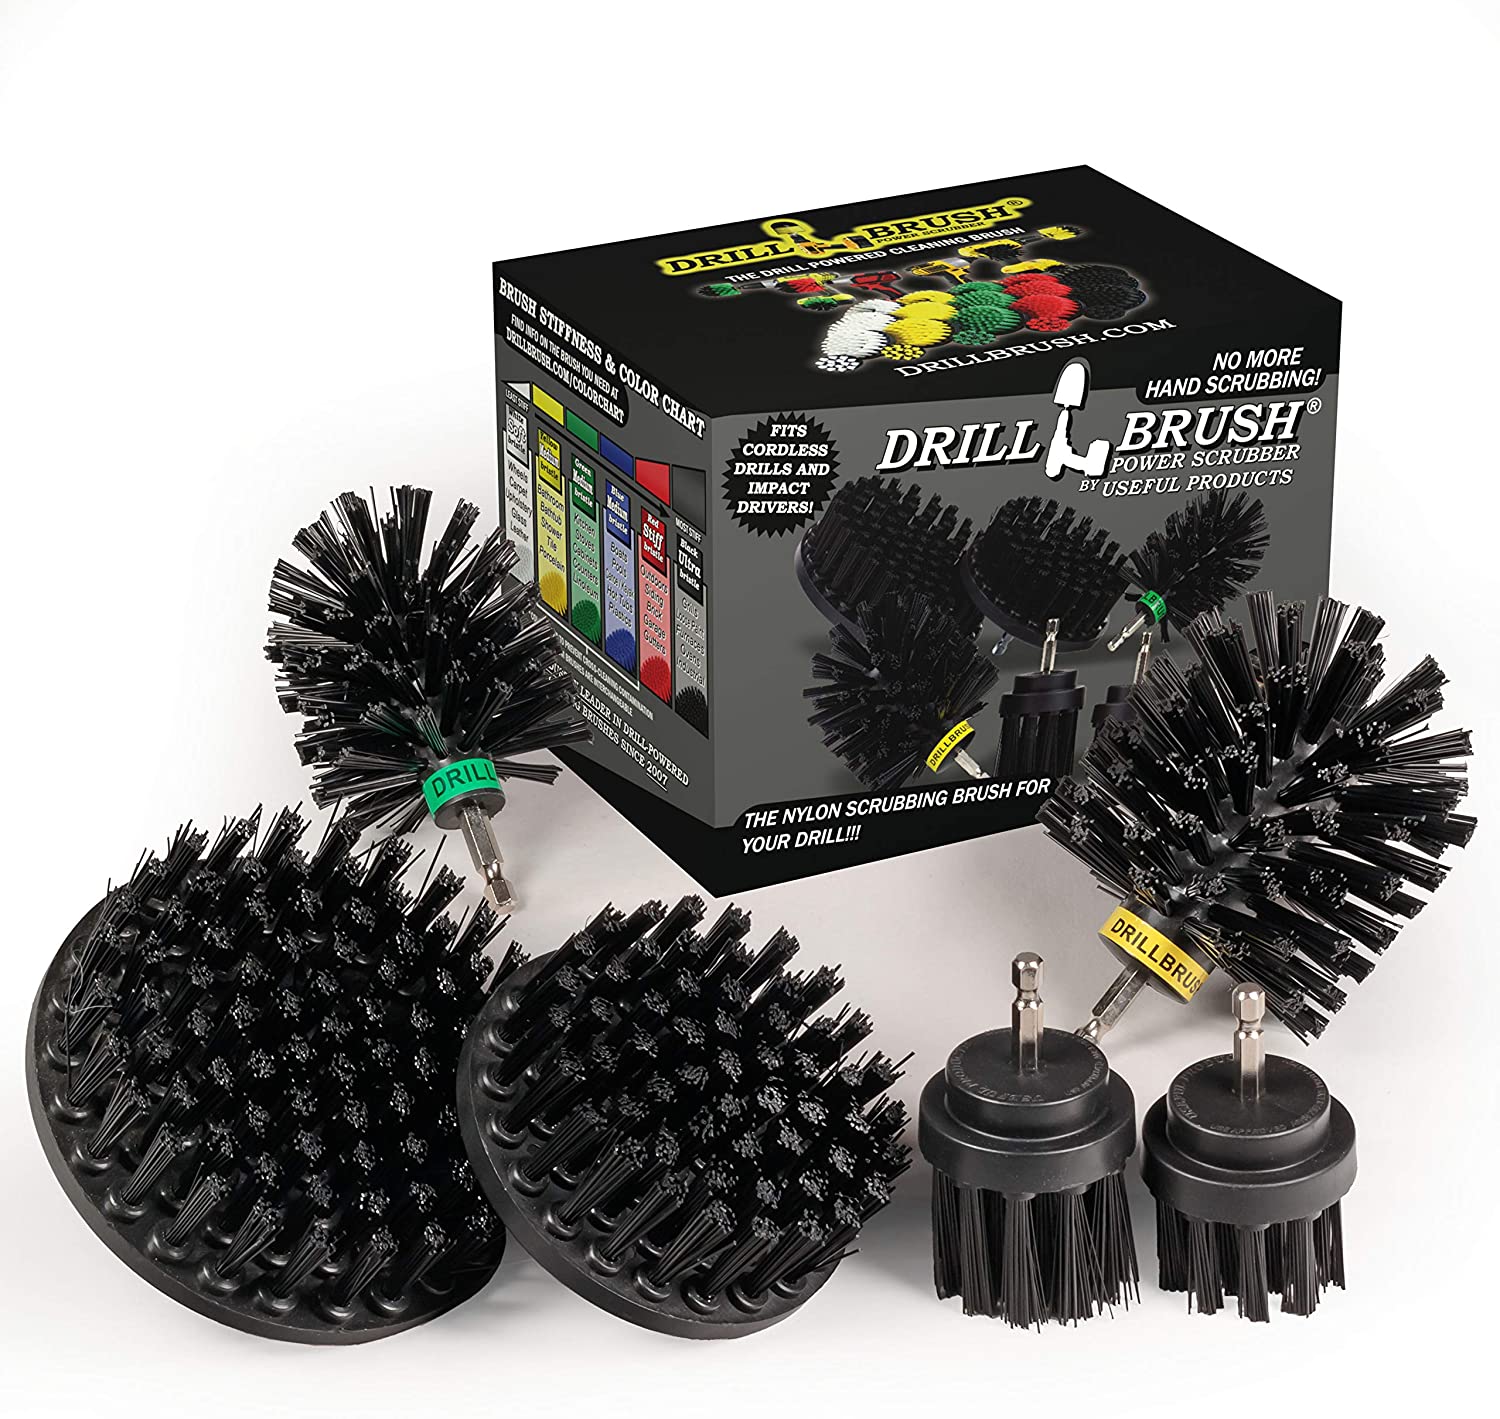 Drillbrush Power Scrubber Rust Resistant Grill Cleaner Attachments